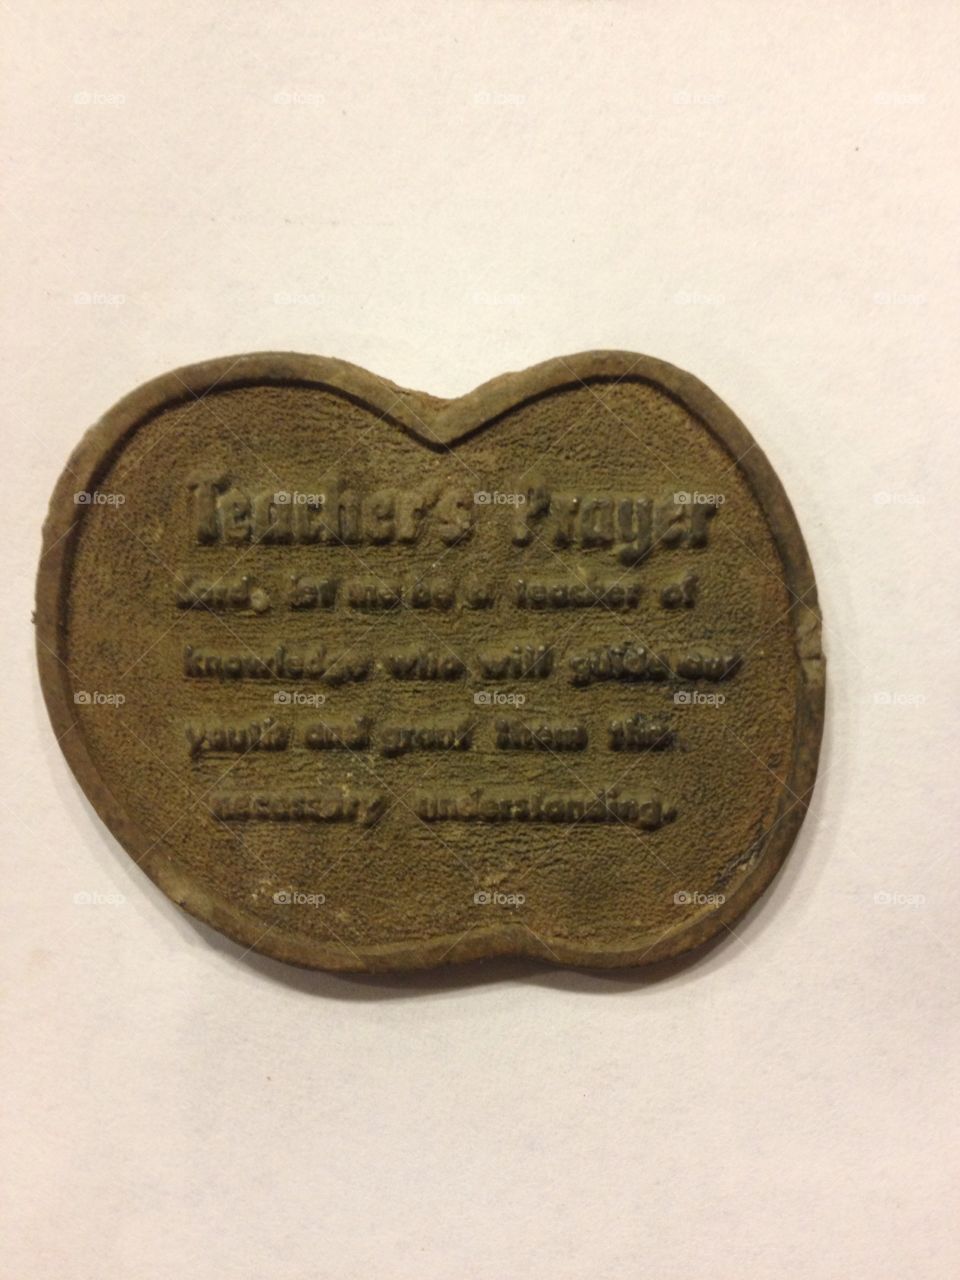 Antique Apple shaped teacher's prayer pocket piece that was found while metal detecting in Texas. Detected at an early 1900's old school site. 